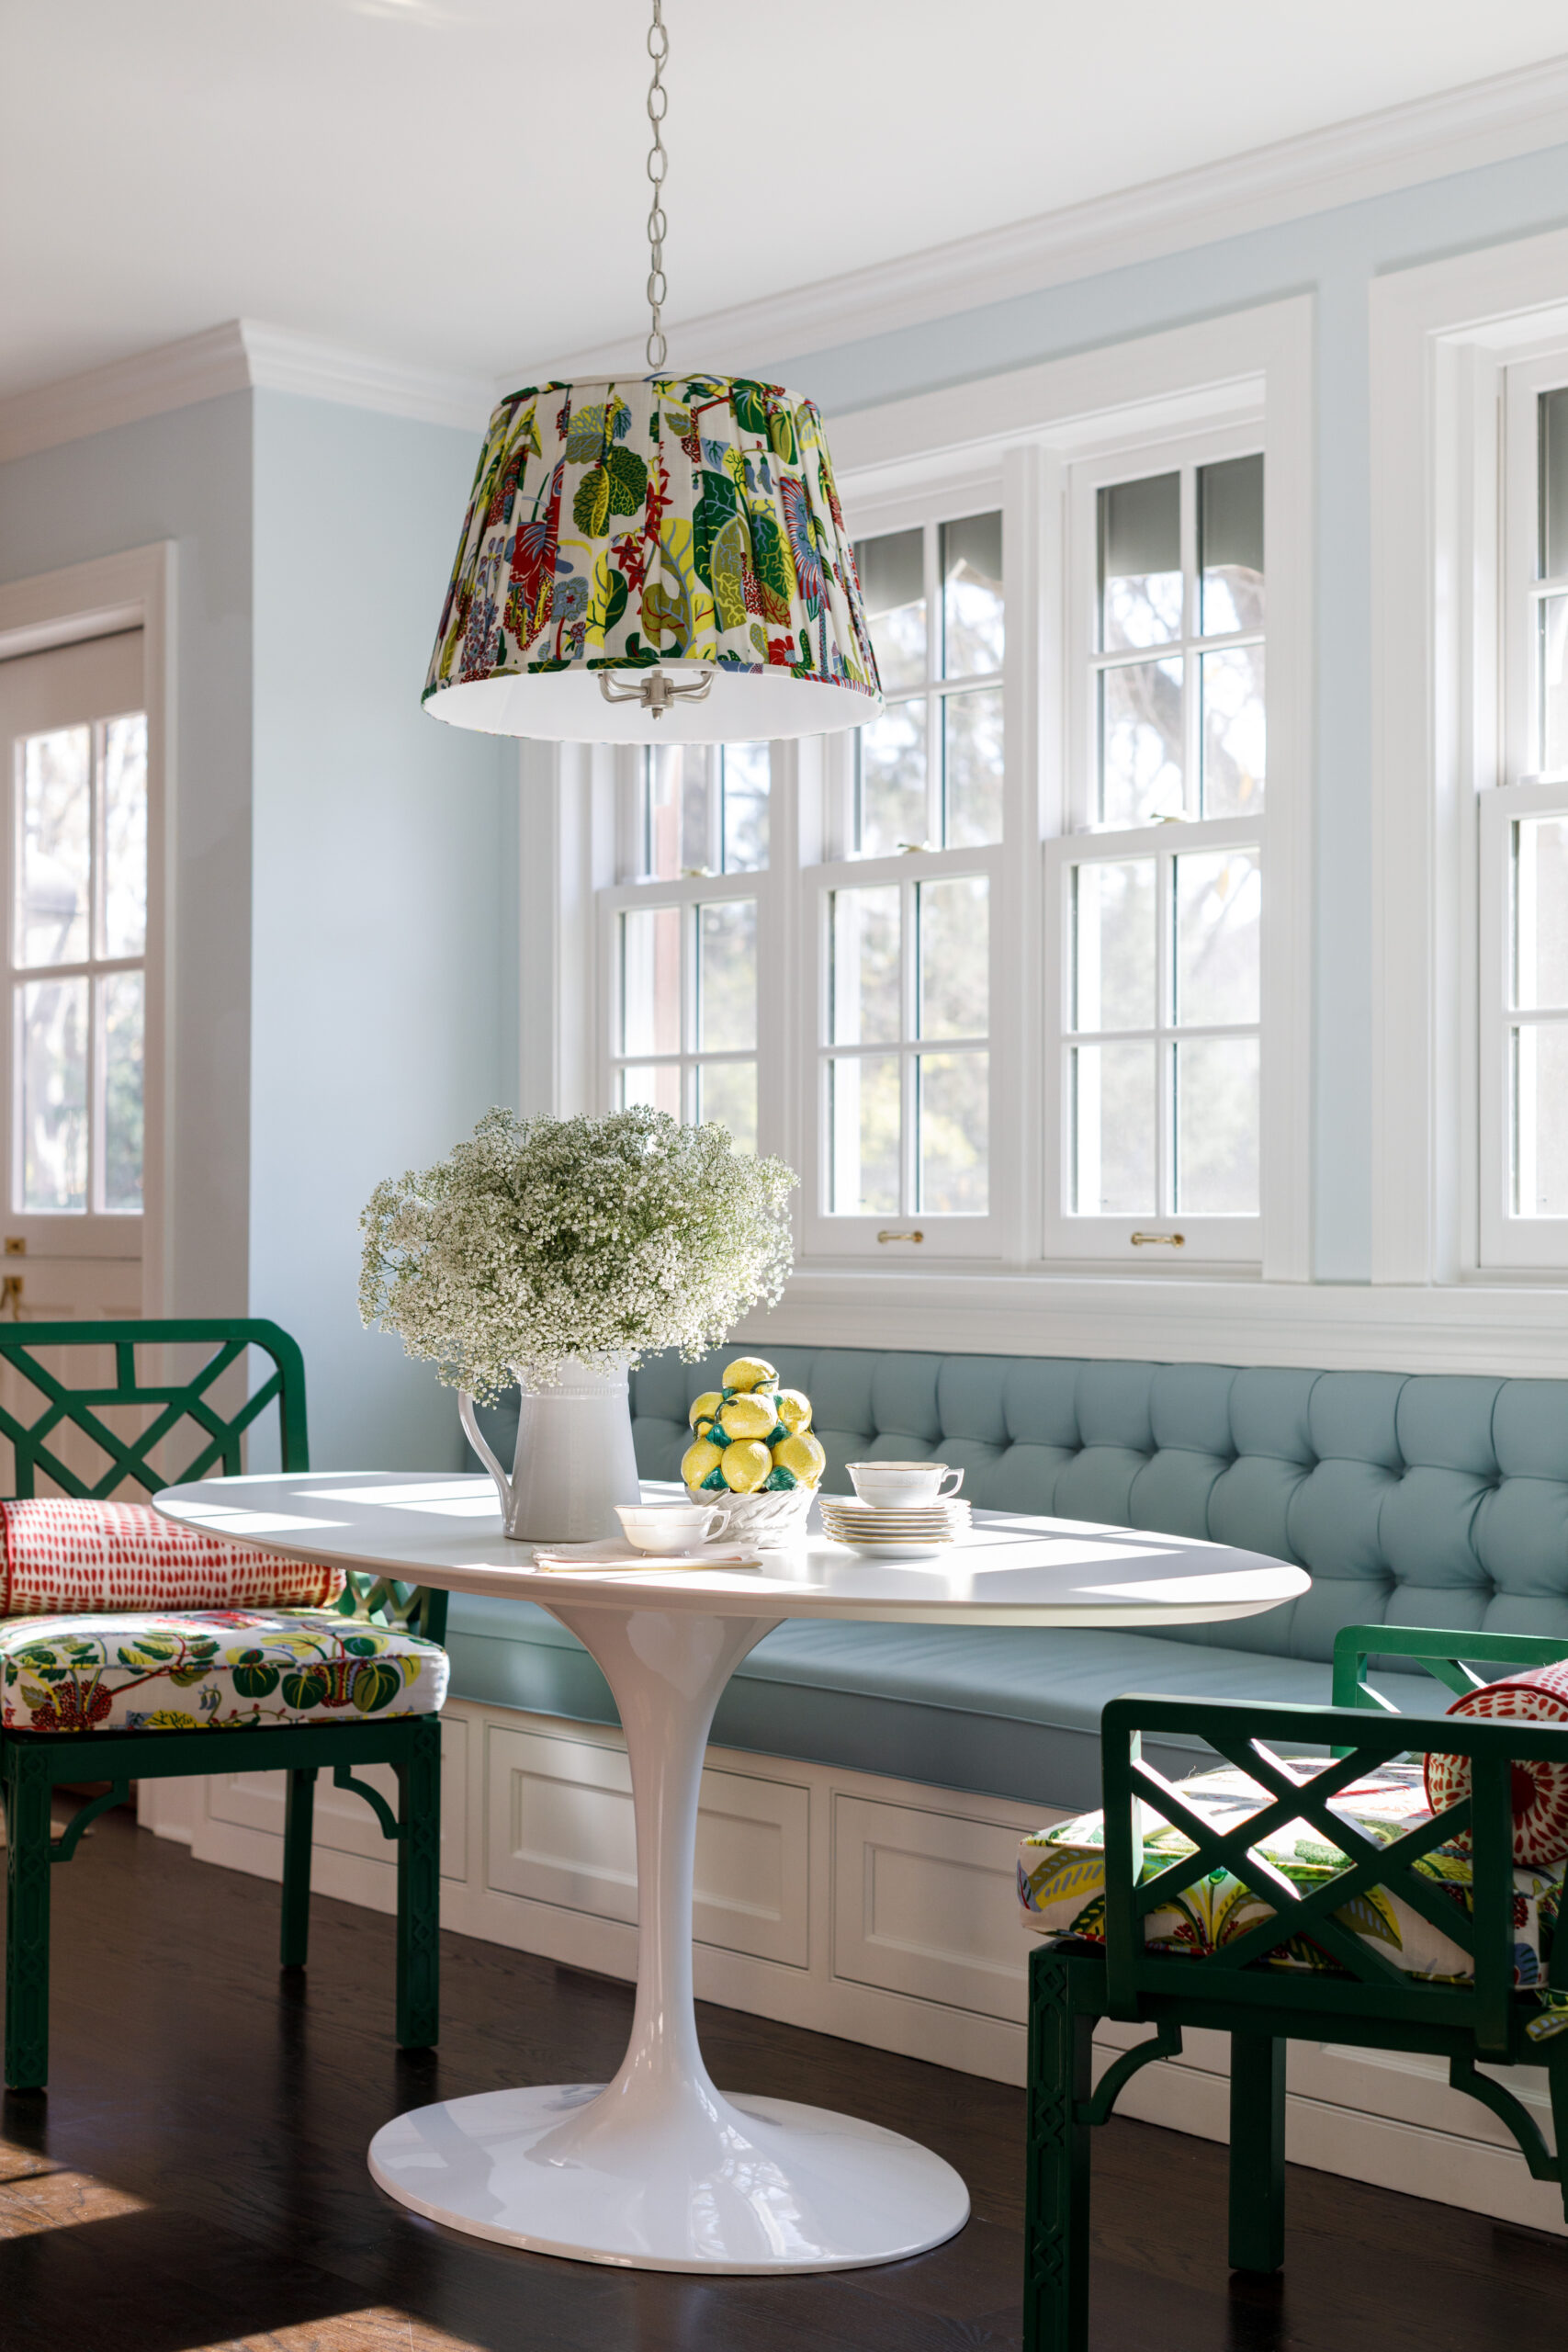 Schumacher Exotic Butterfly by Josef Frank | Design by M M Interiors, photo by Aimee Mazzenga